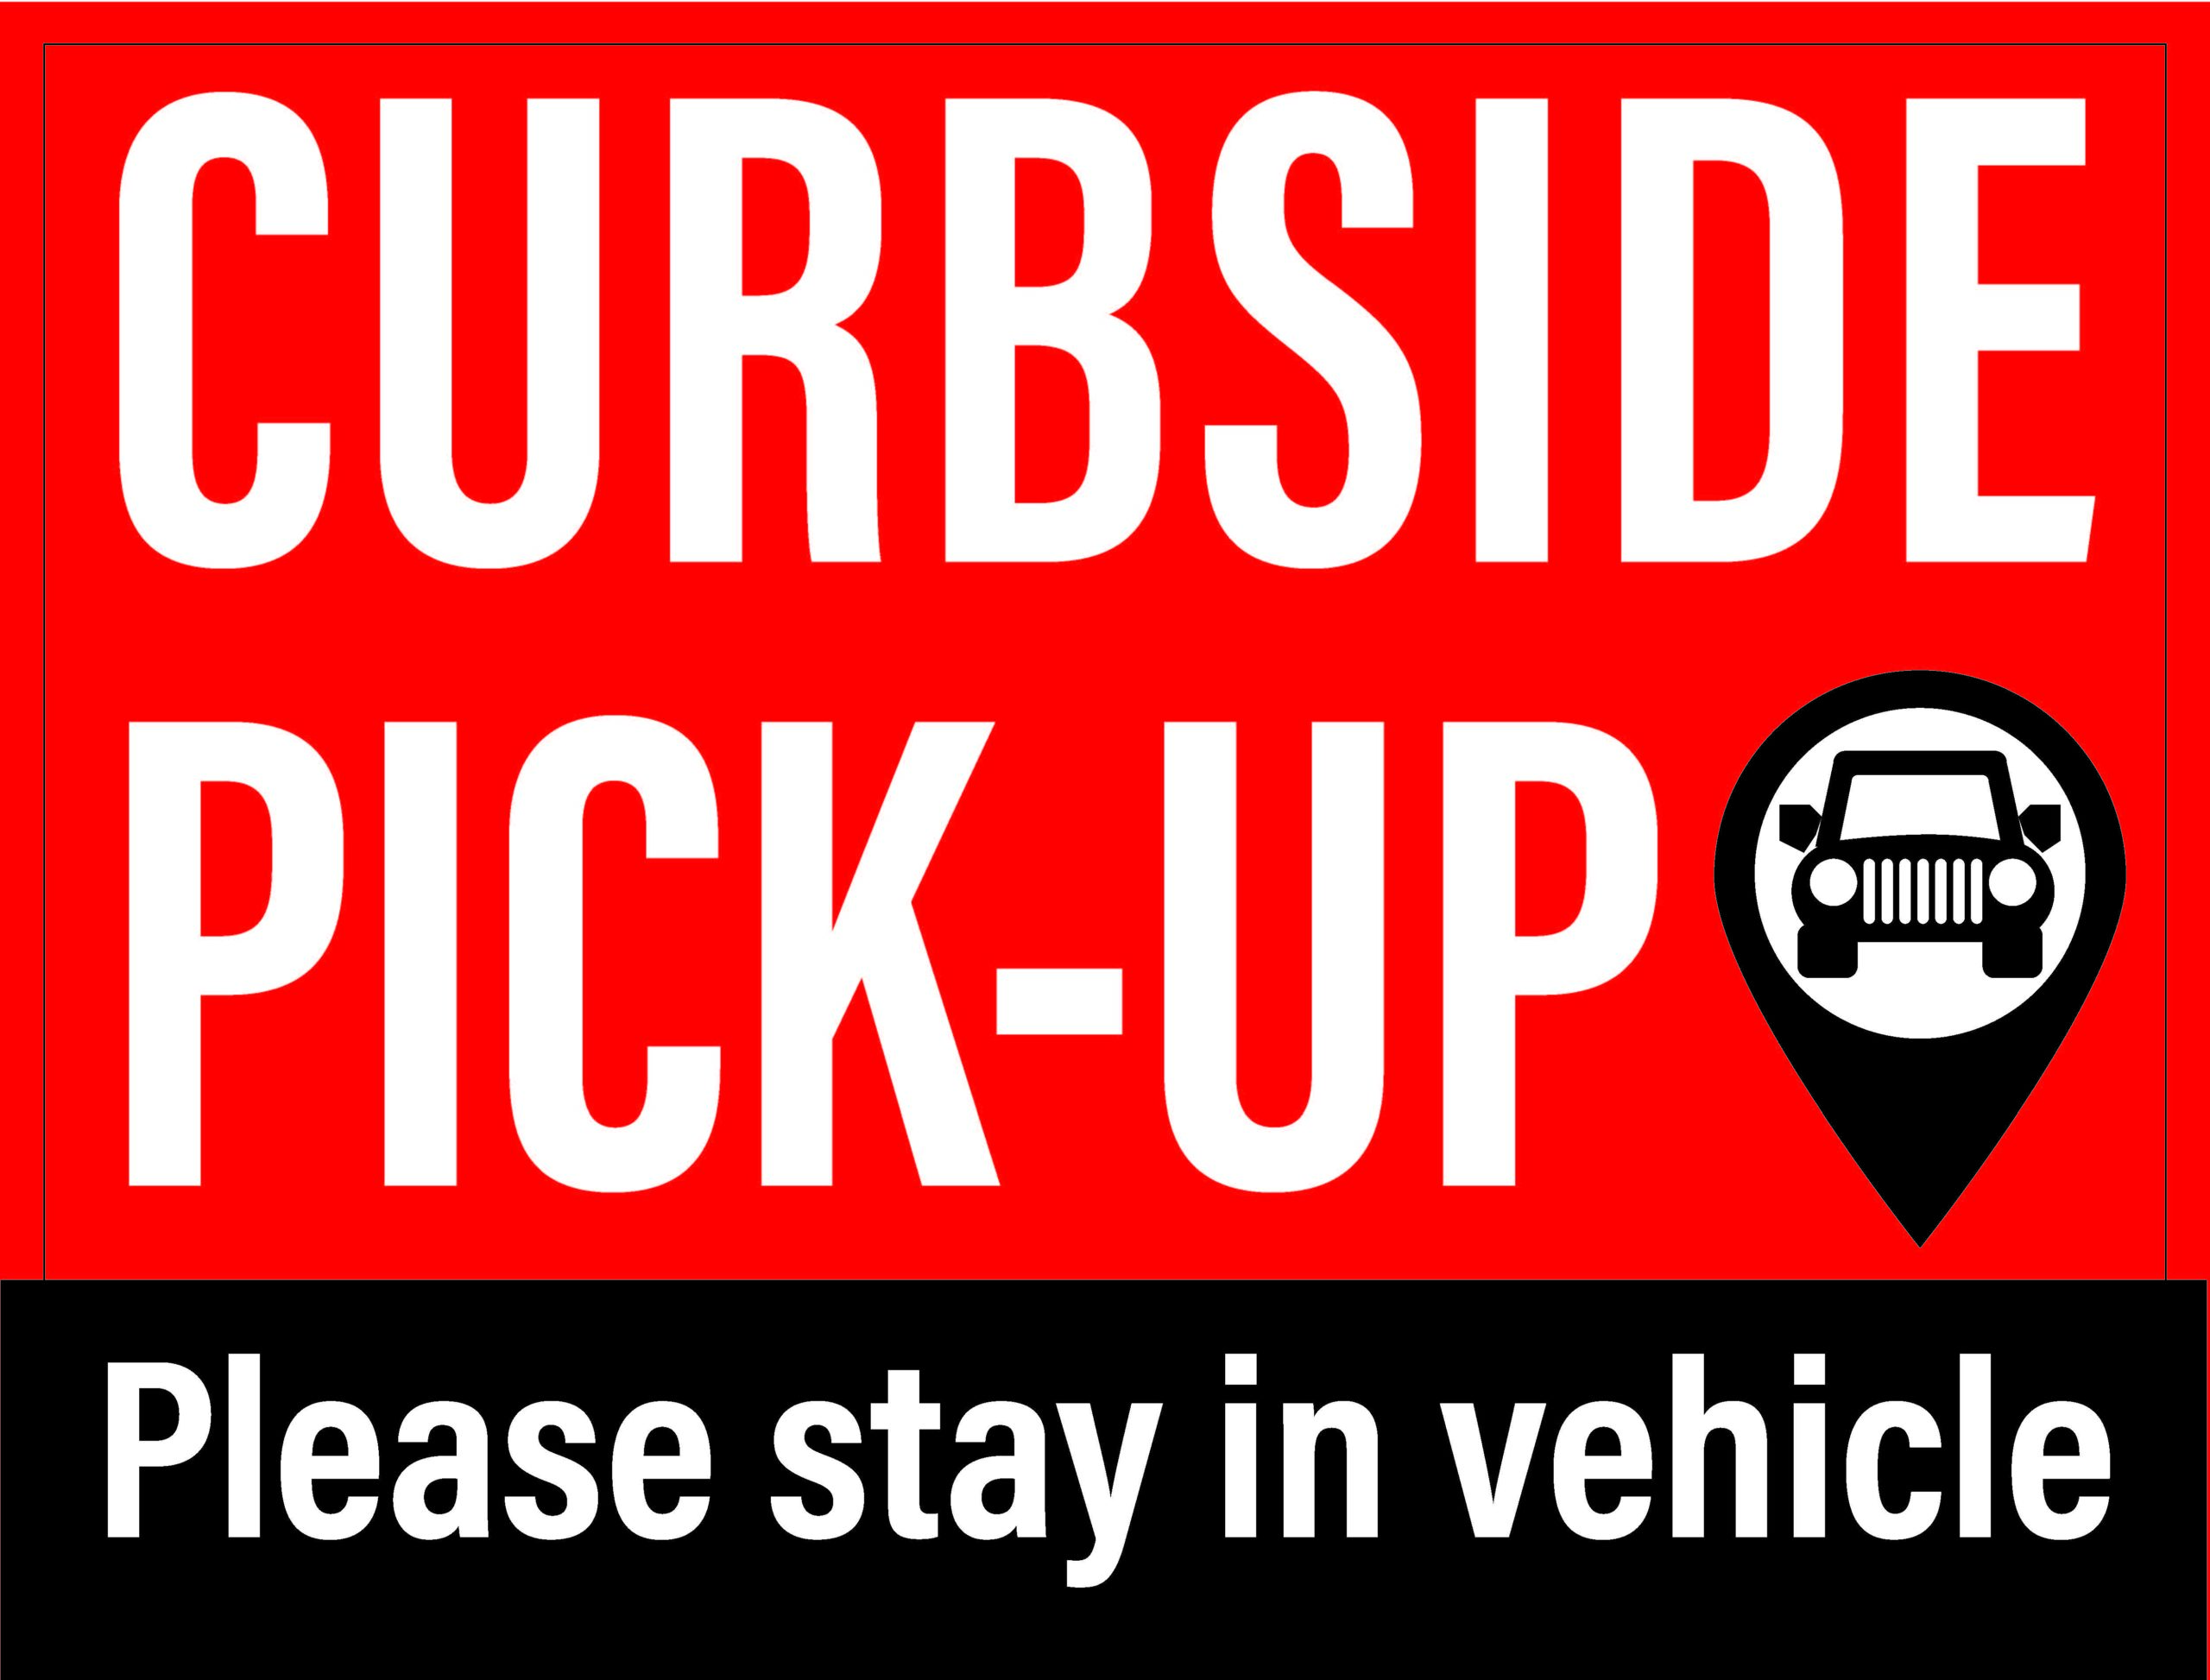 Single-Sided Curbside Pickup Signs 18x24"